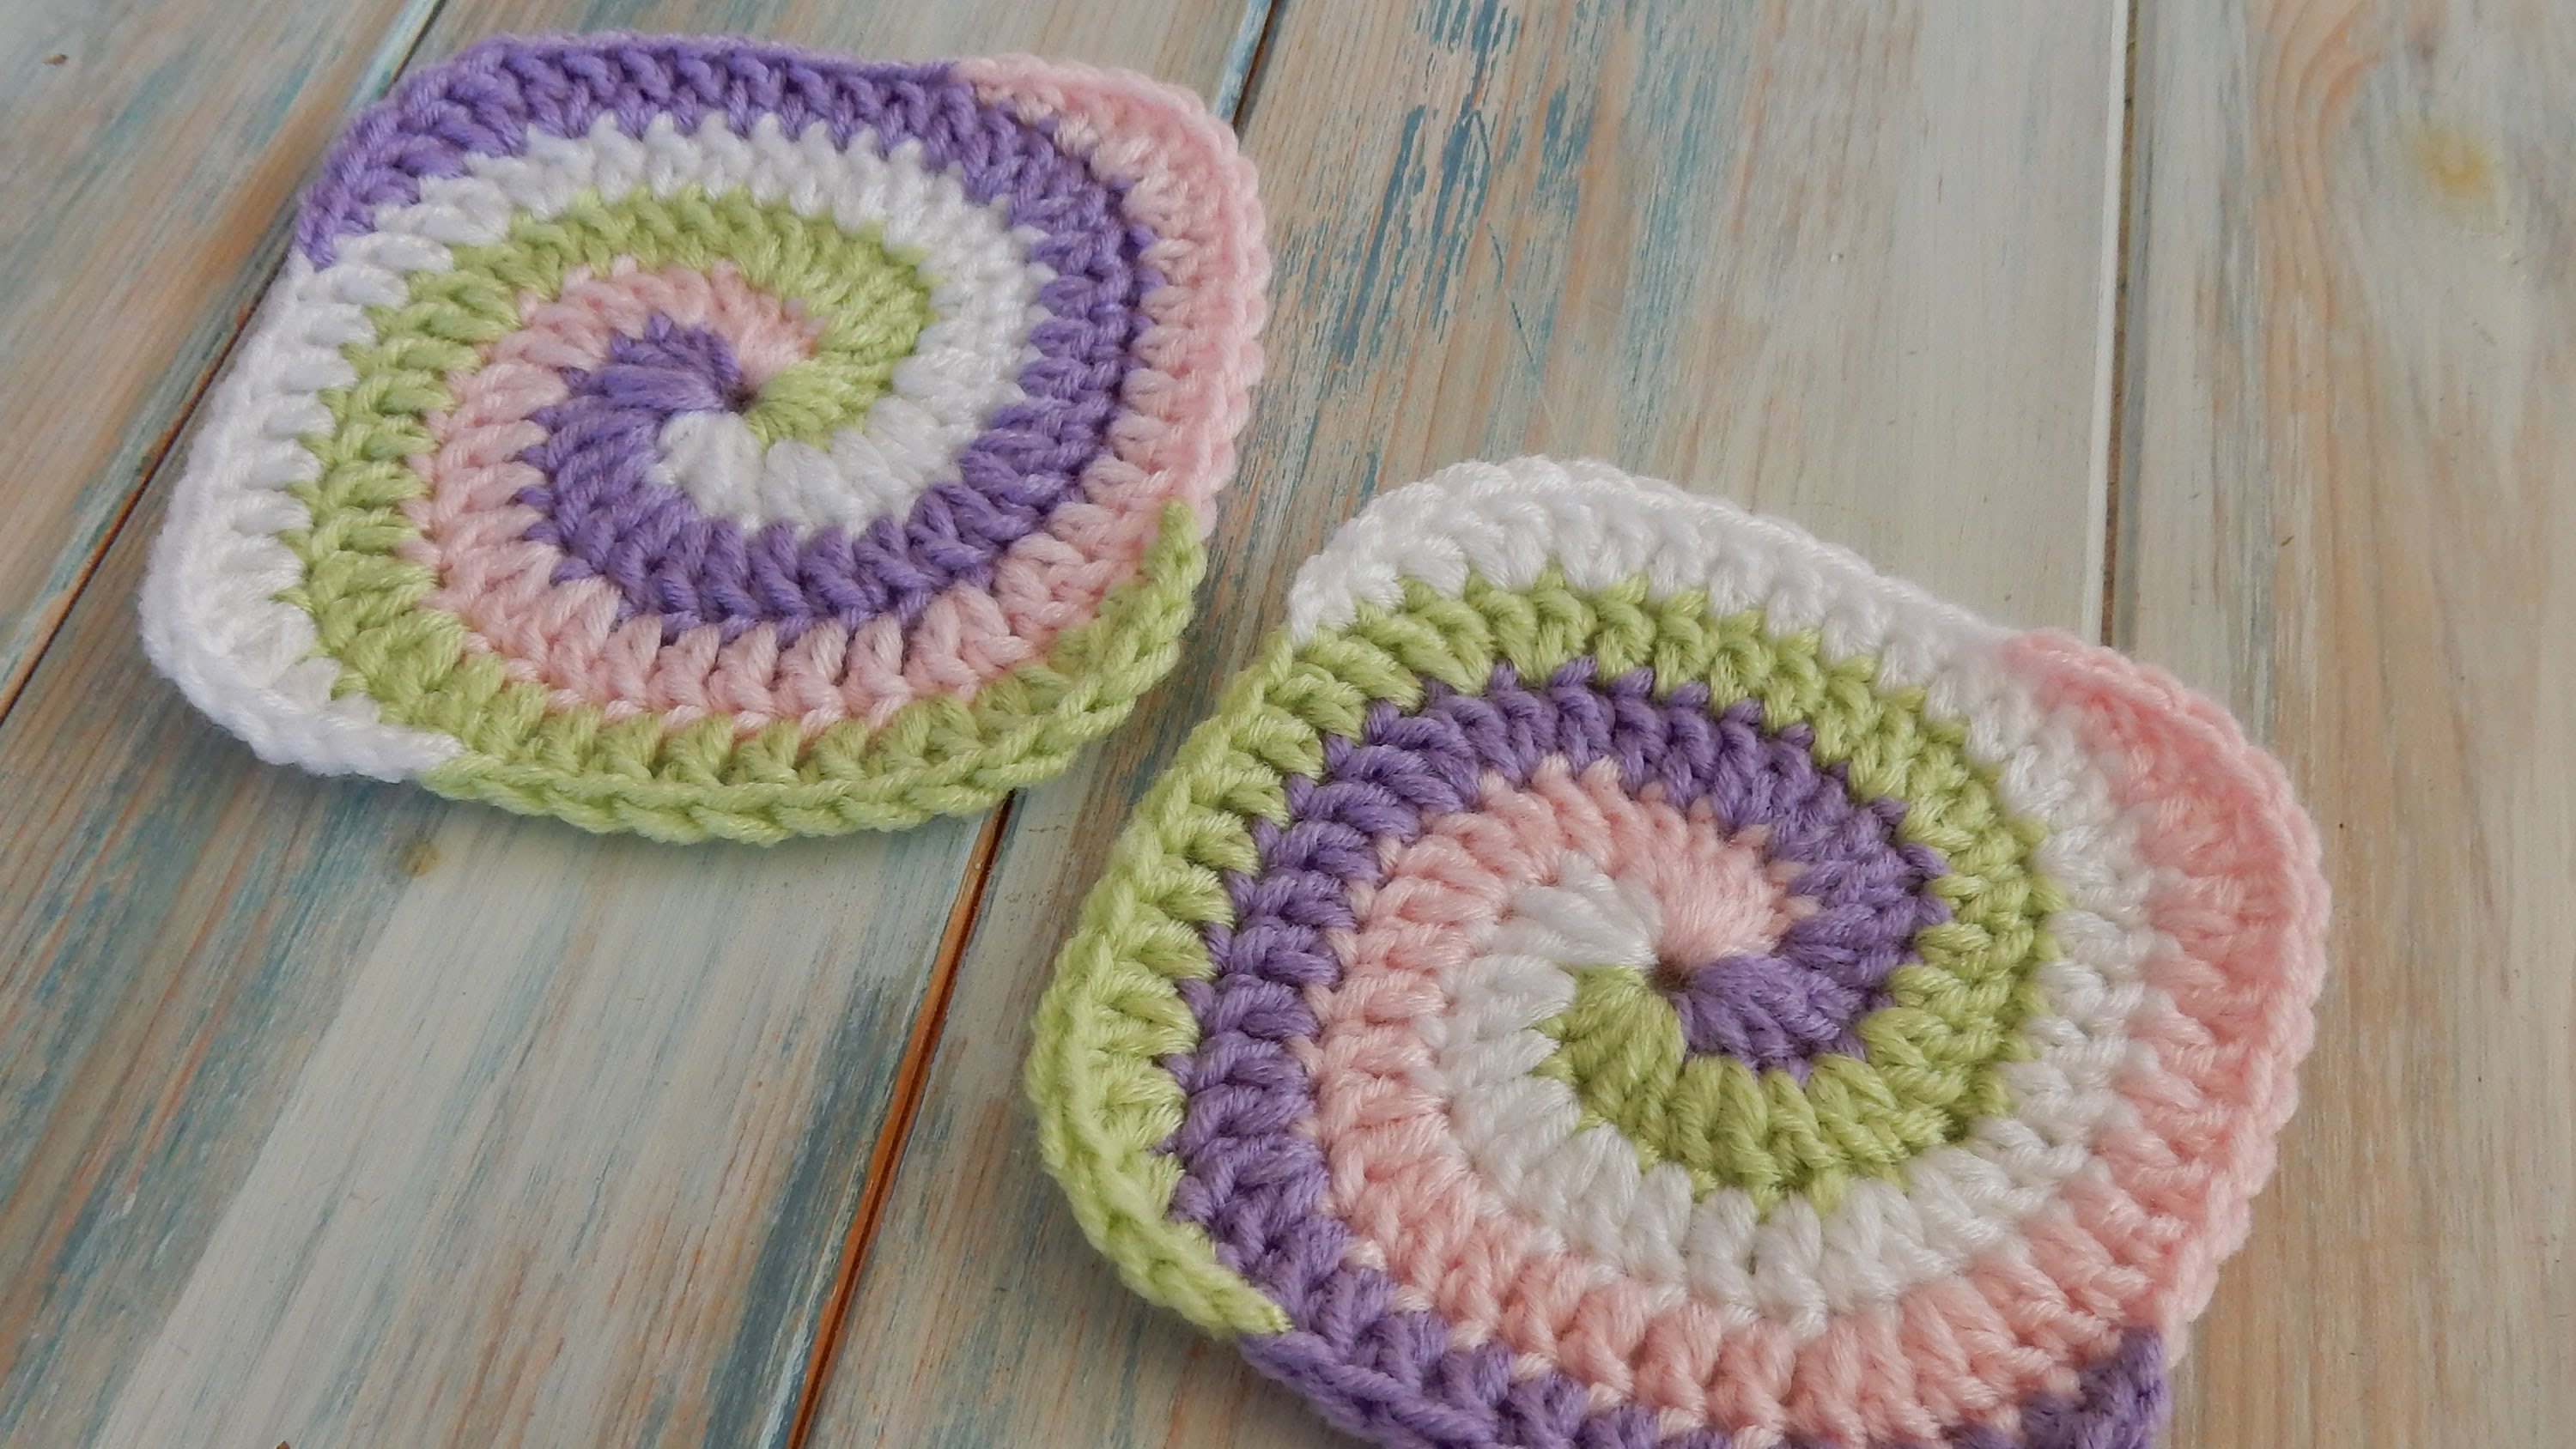 12 Granny Square Crochet Pattern Video Tutorial This Cute Spiral Granny Square Is Surprisingly Easy